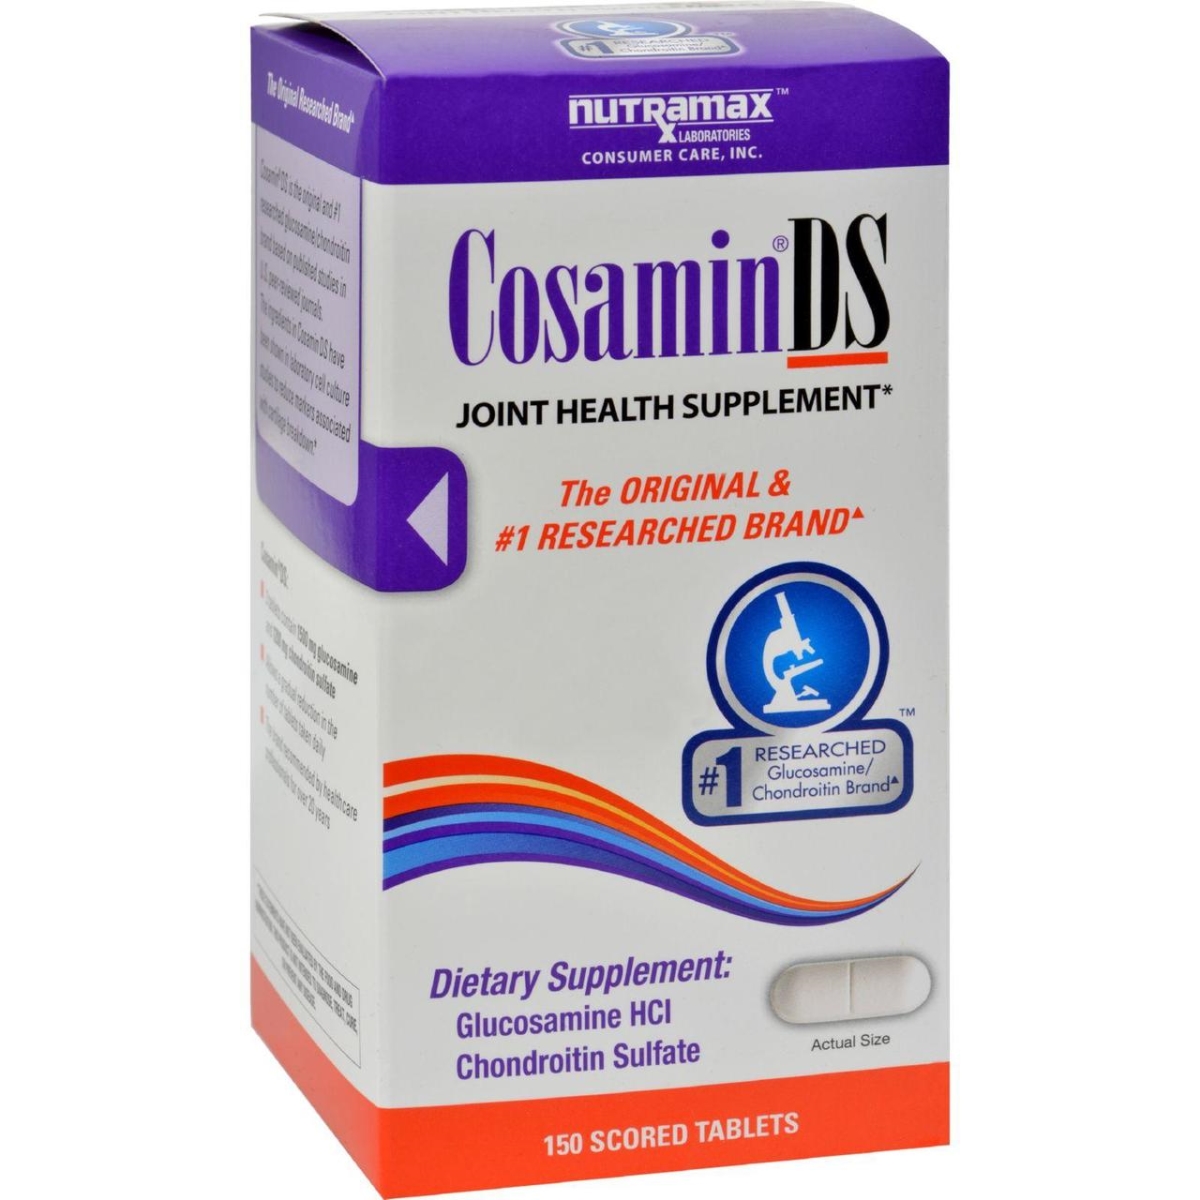 Hg0426858 Cosaminds Joint Health Supplement - 150 Tablets